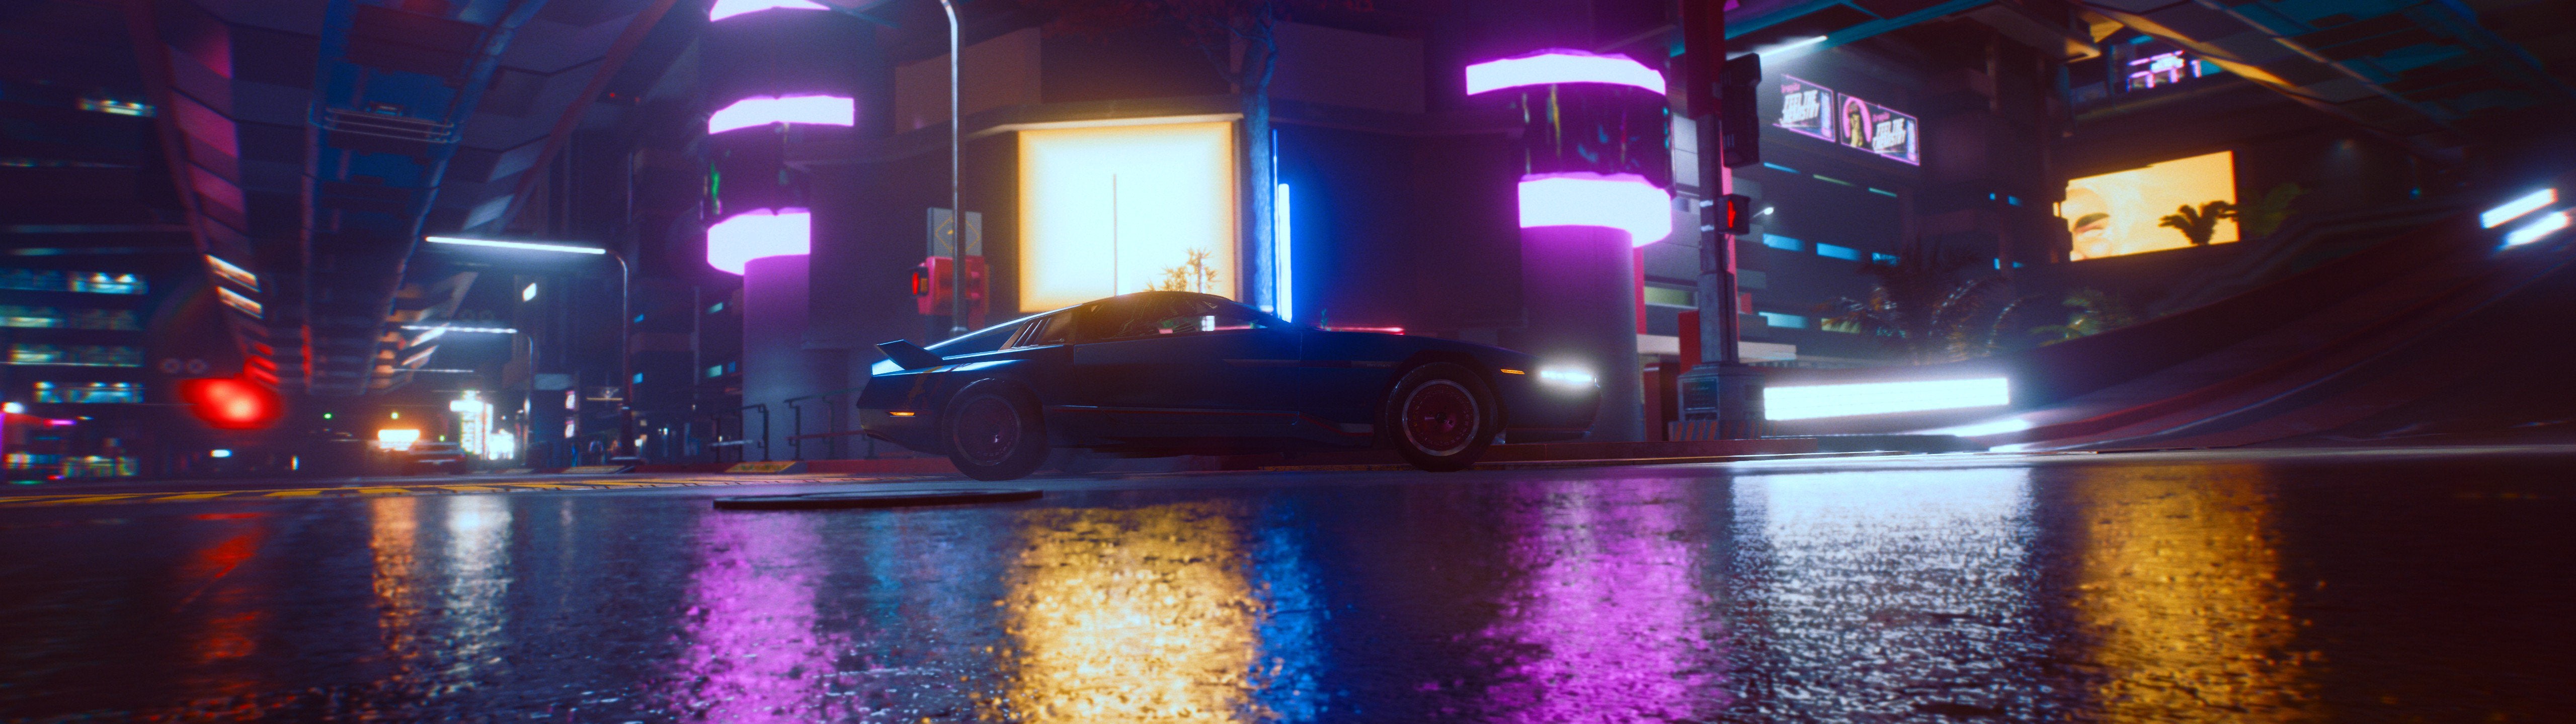 Cyberpunk 2077 album, feel free to share your ultrawide pics :)